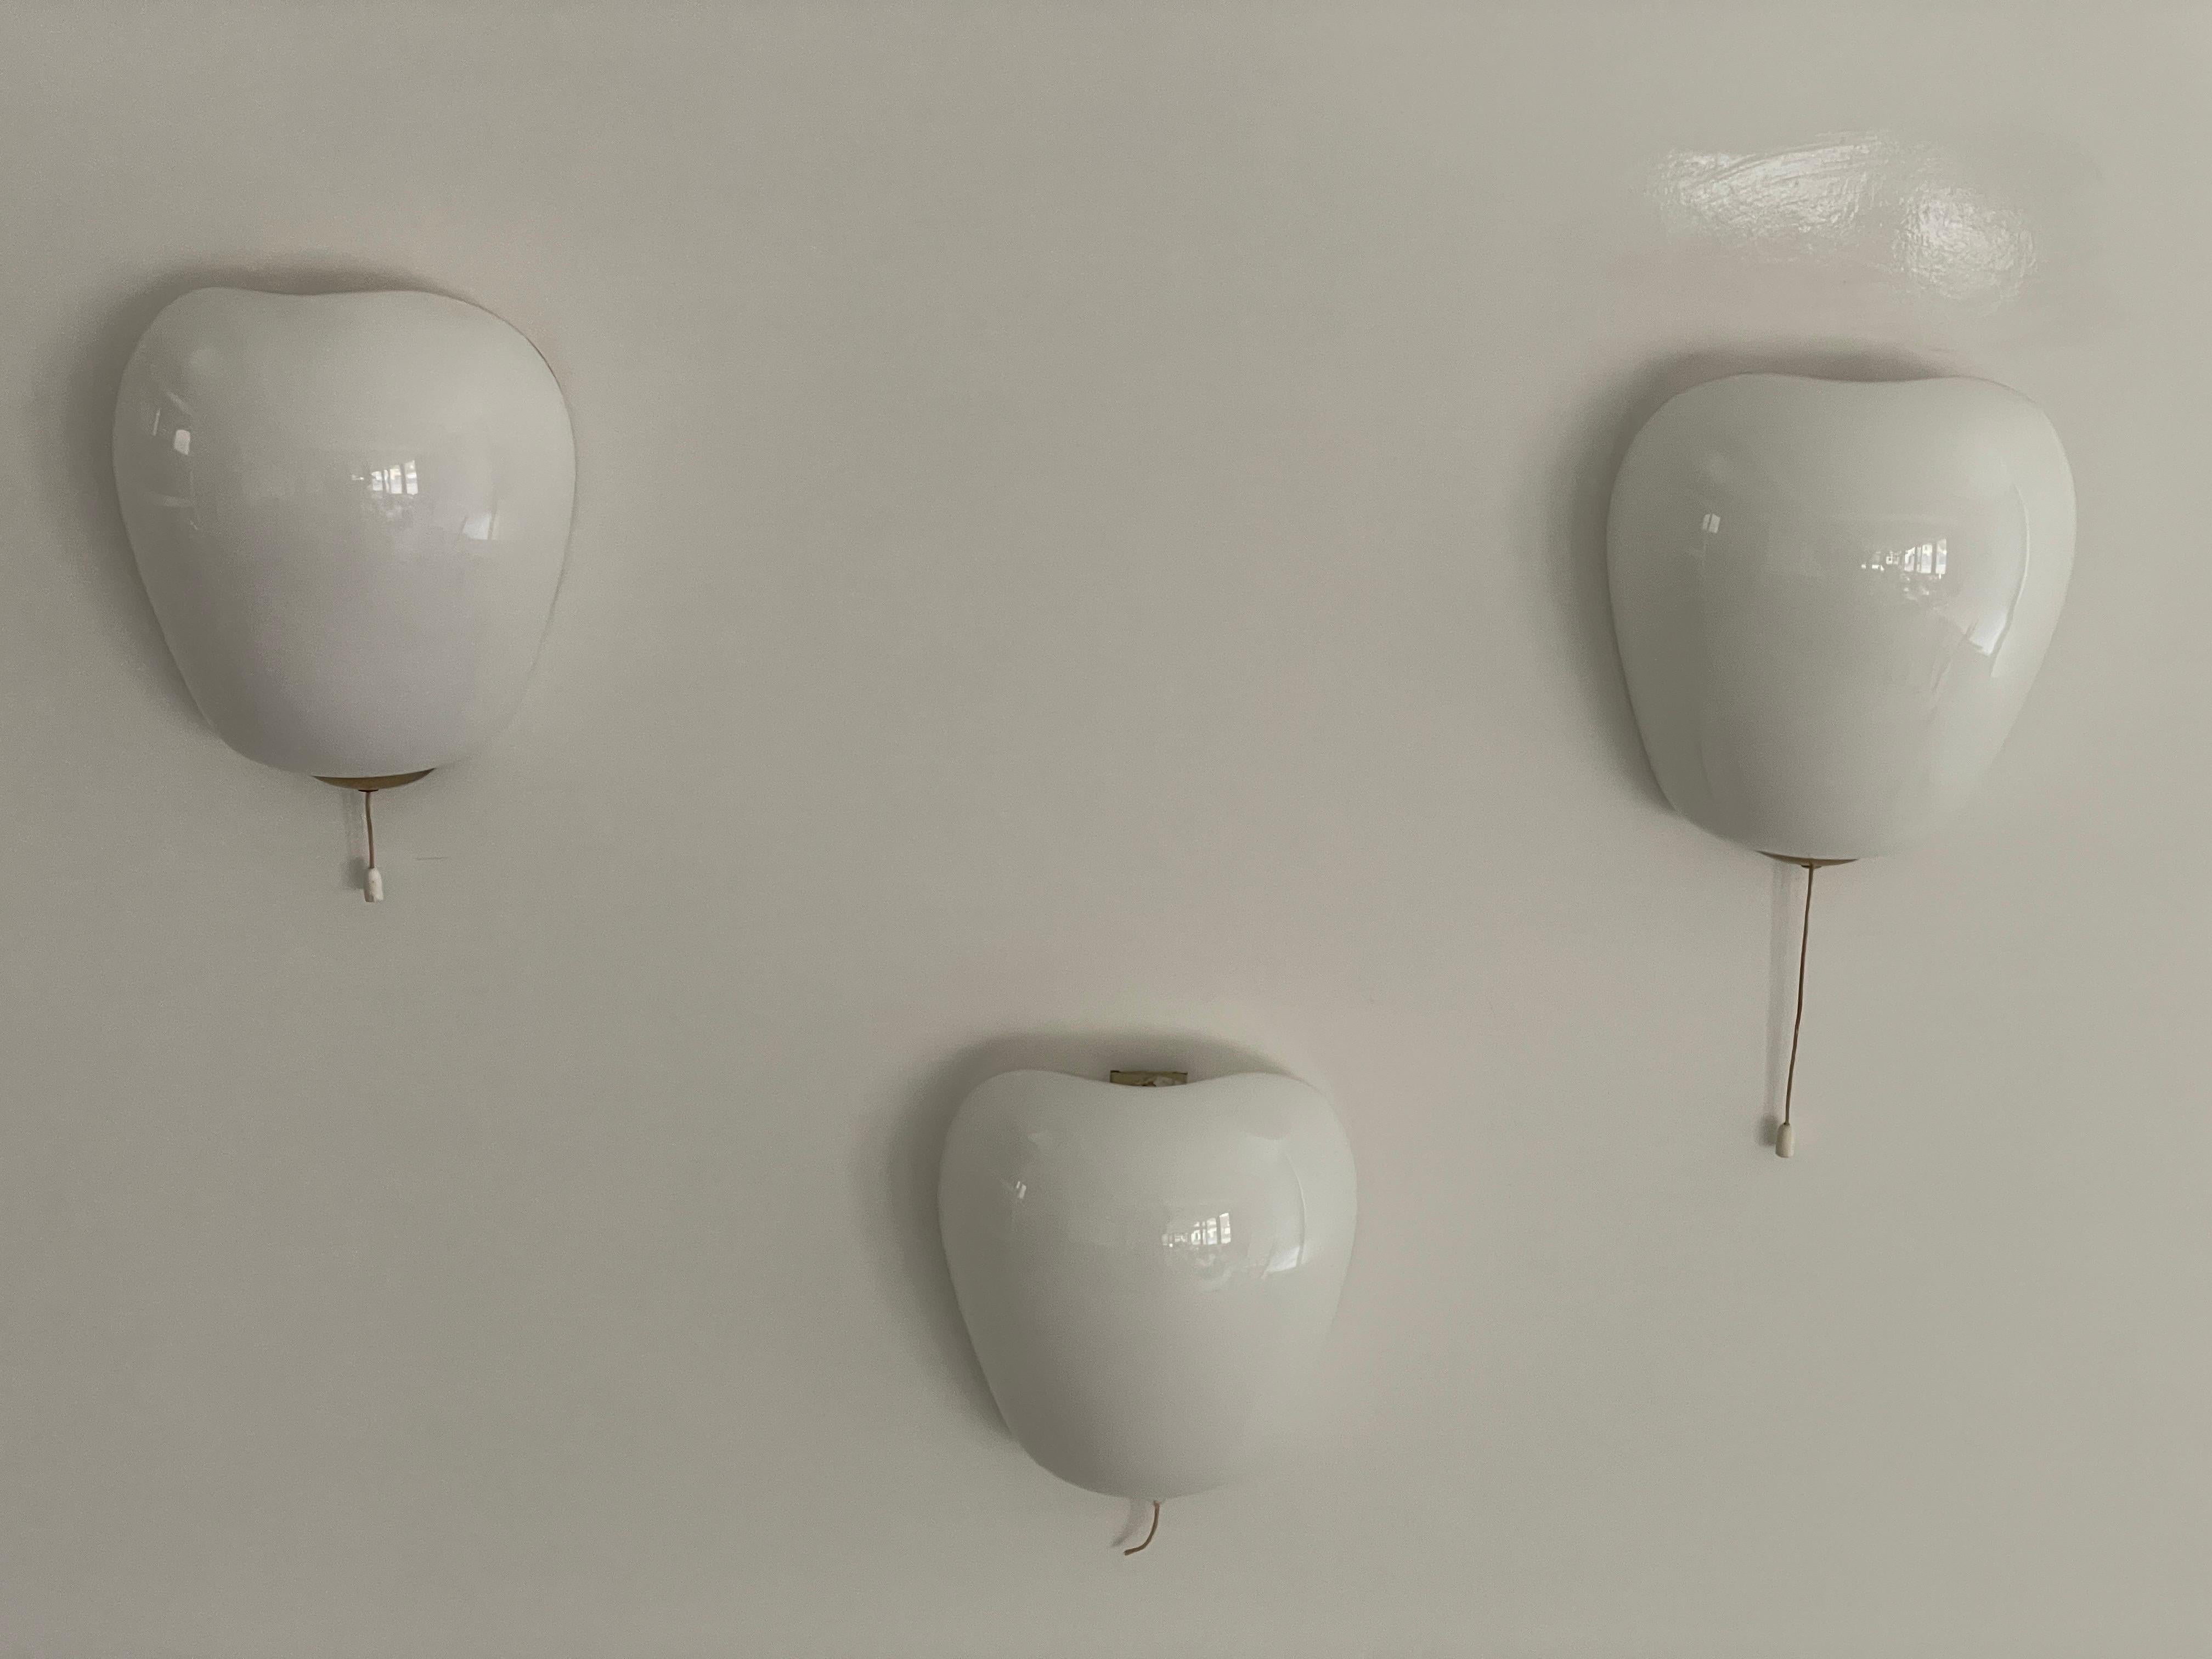 Glass and Brass Sconces by Wilhelm Wagenfeld for Peill & Putzler, 1960s, Germany
set of 3

Very elegant and Minimalist wall lamps

Lamps are in very good condition.

These lamps works with E14 standard light bulbs. Each lamp works with 1 light bulb.